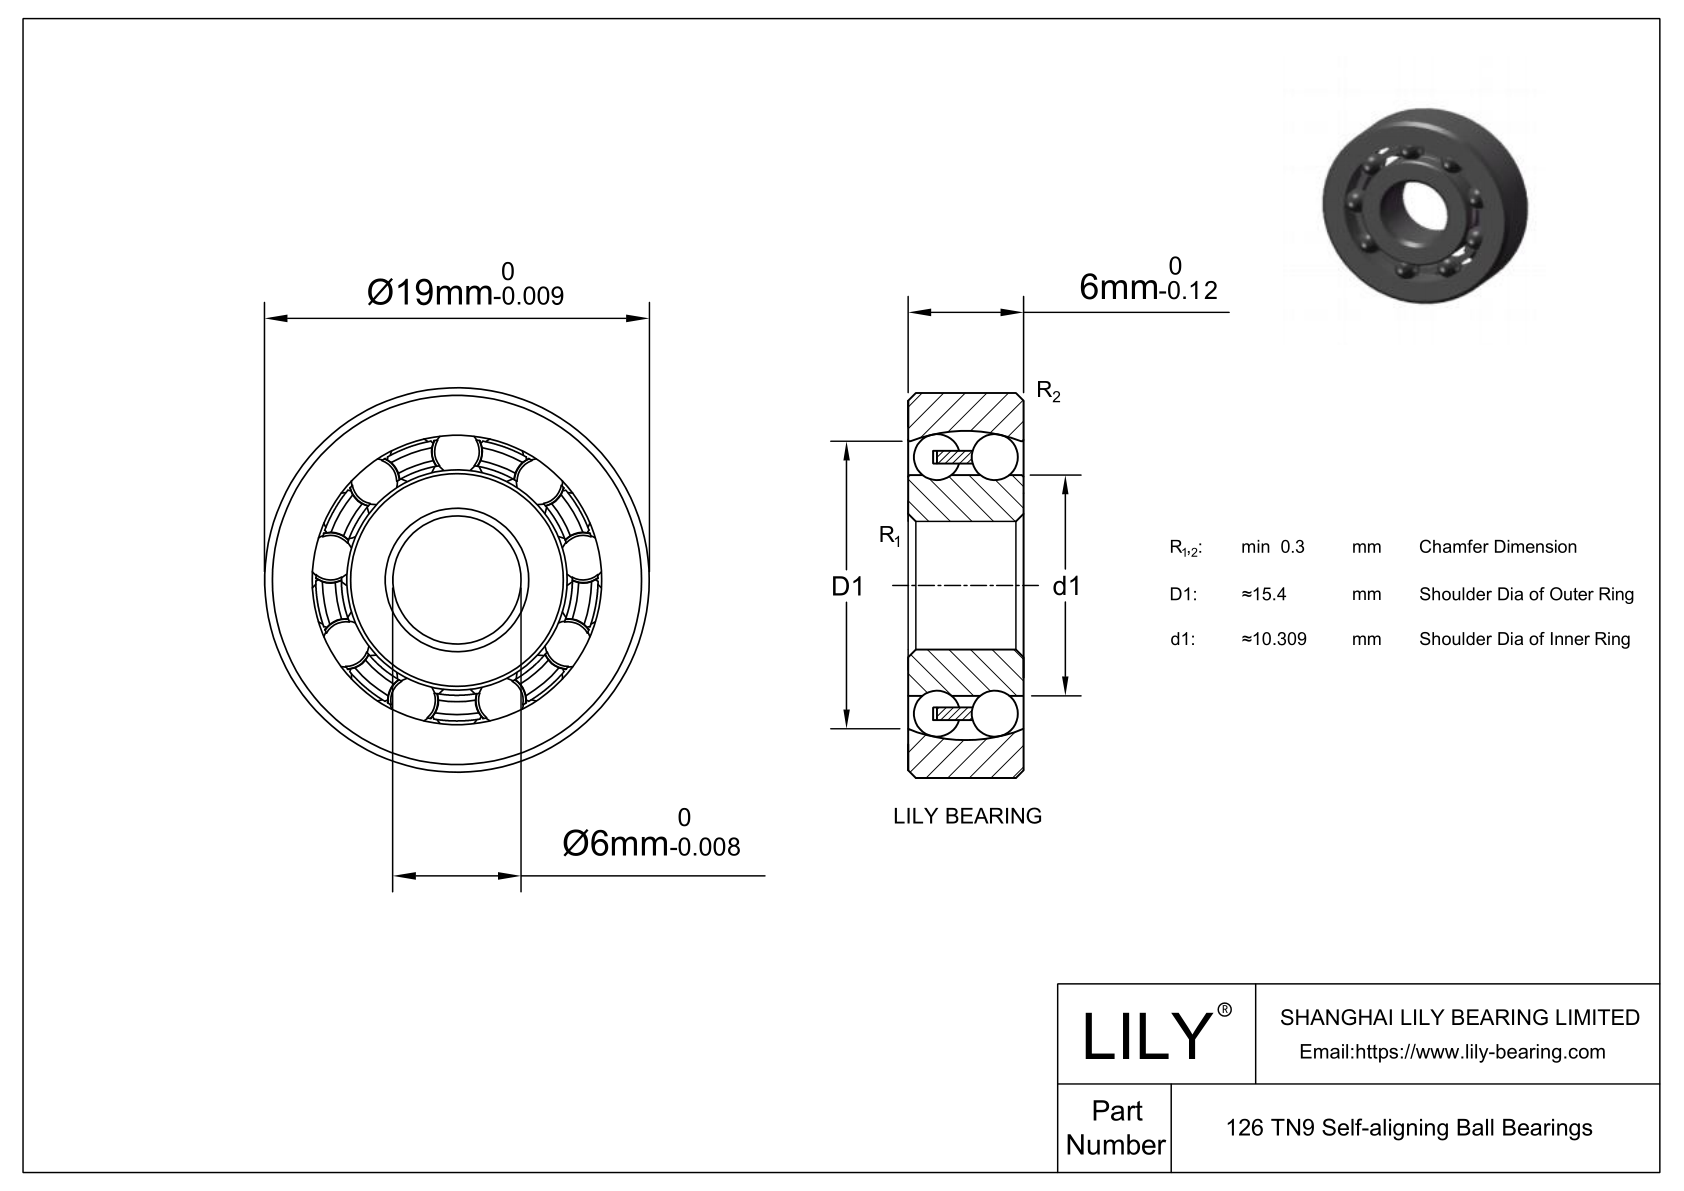 CE126SC Silicon Carbide Self Aligning Ball Bearings cad drawing